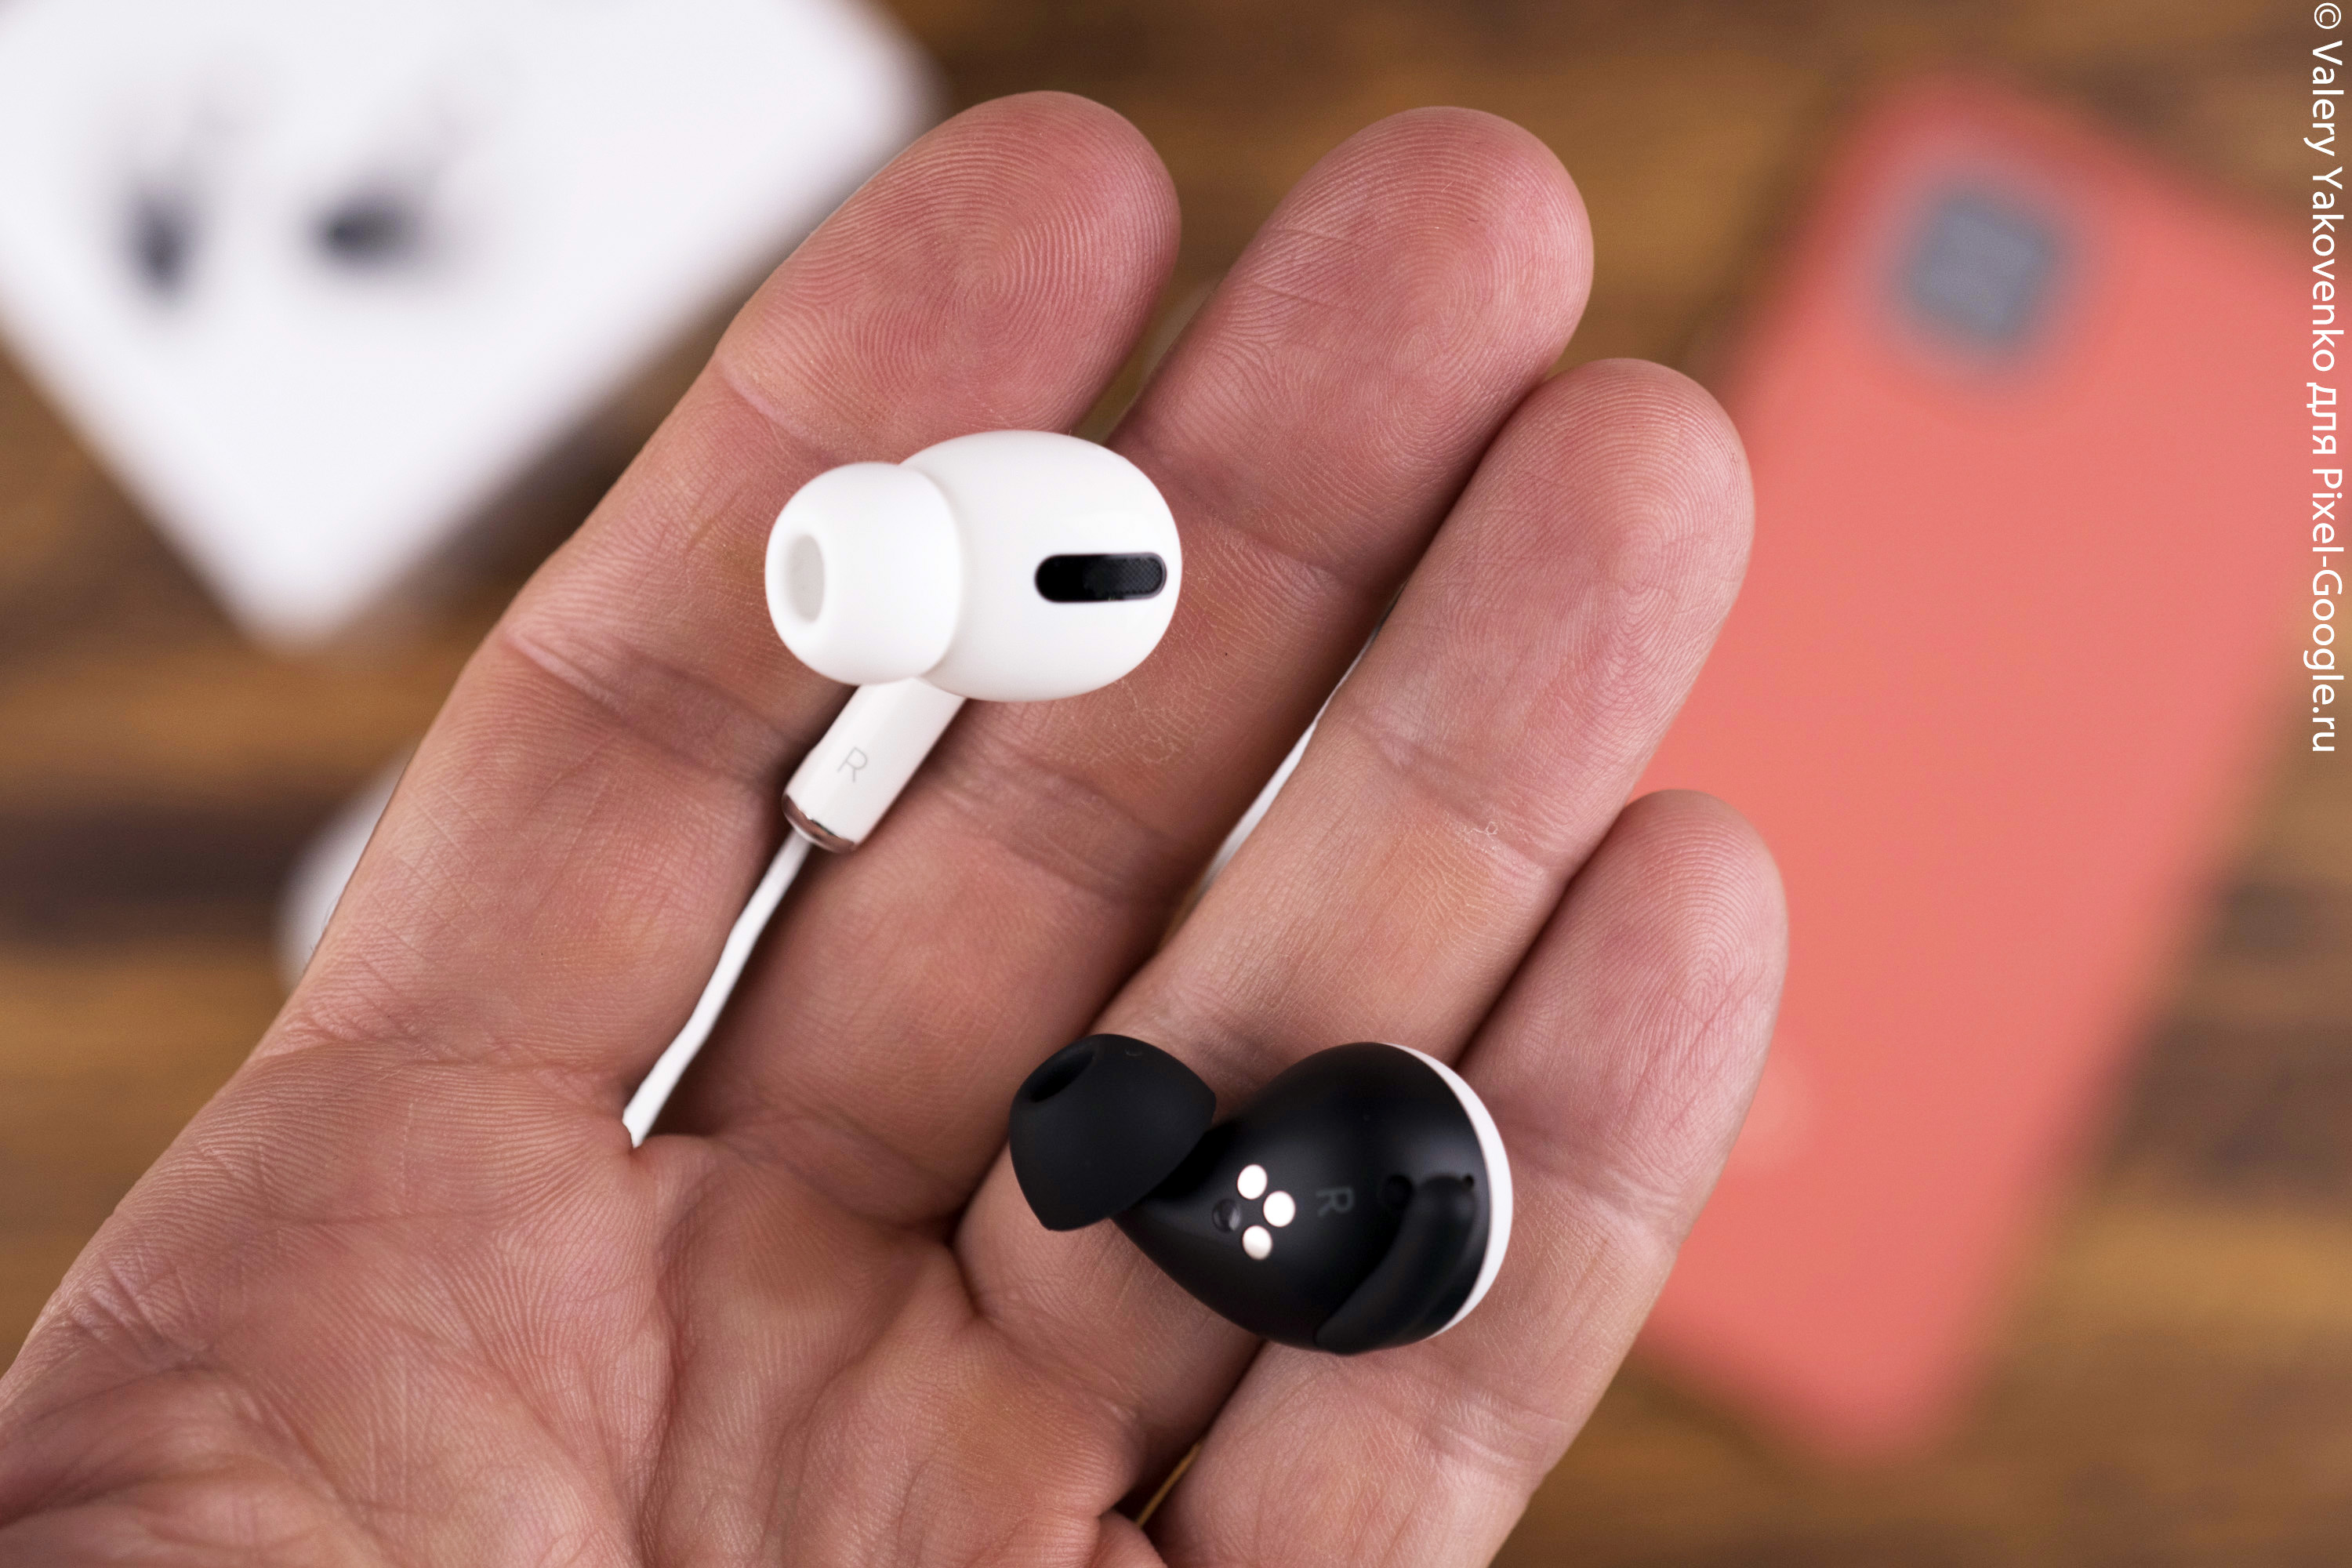 Looking to Buy Earbuds for Your Pixel 2 XL Phone. Discover the Top Options Here